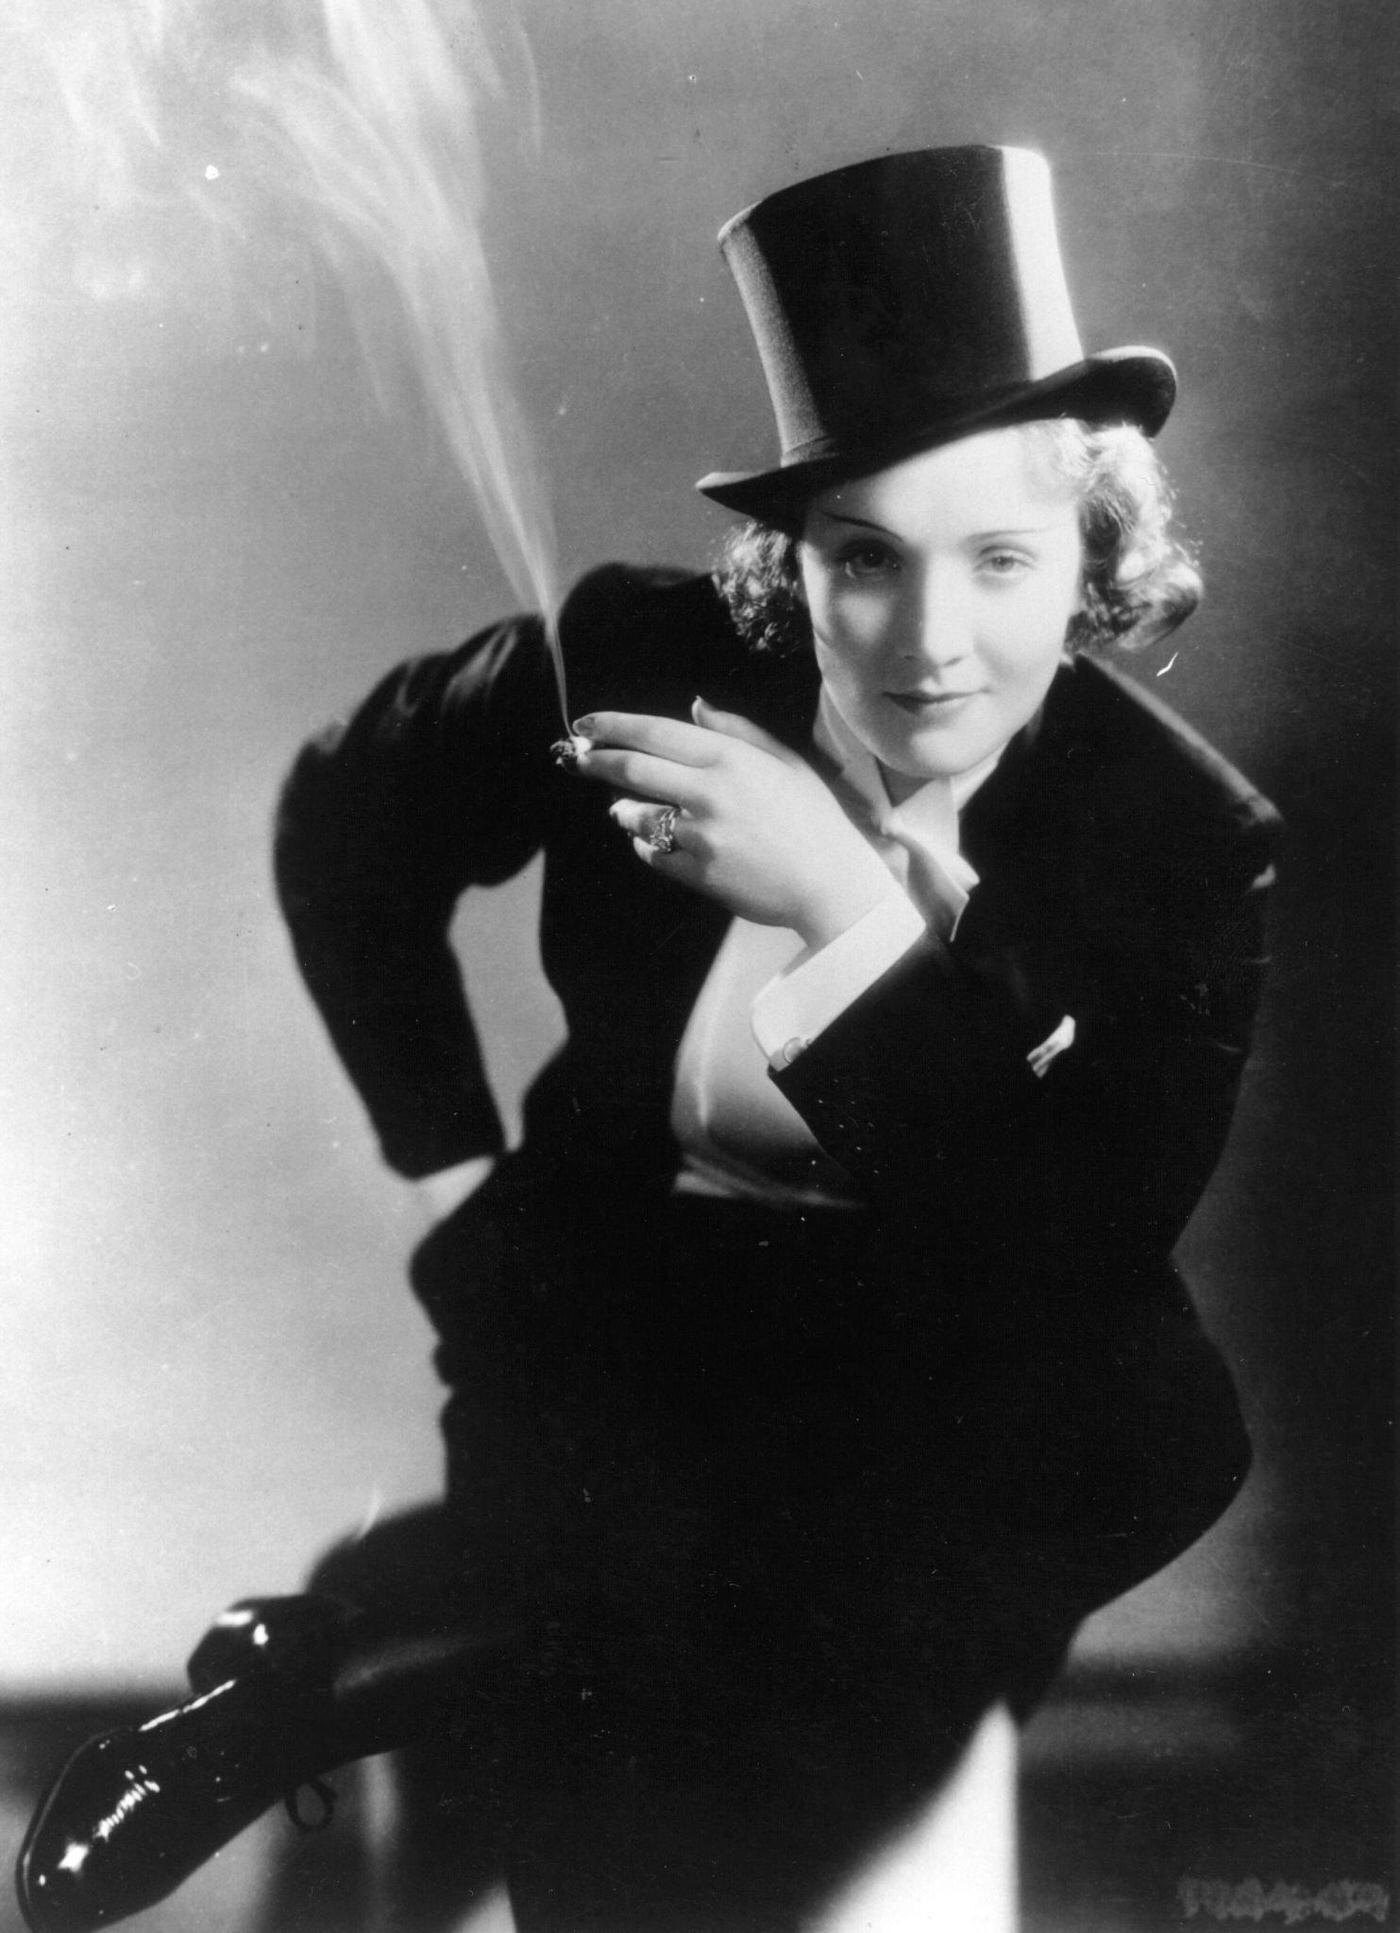 German-born American film star Marlene Dietrich dressed in men's top hat and tails and smoking